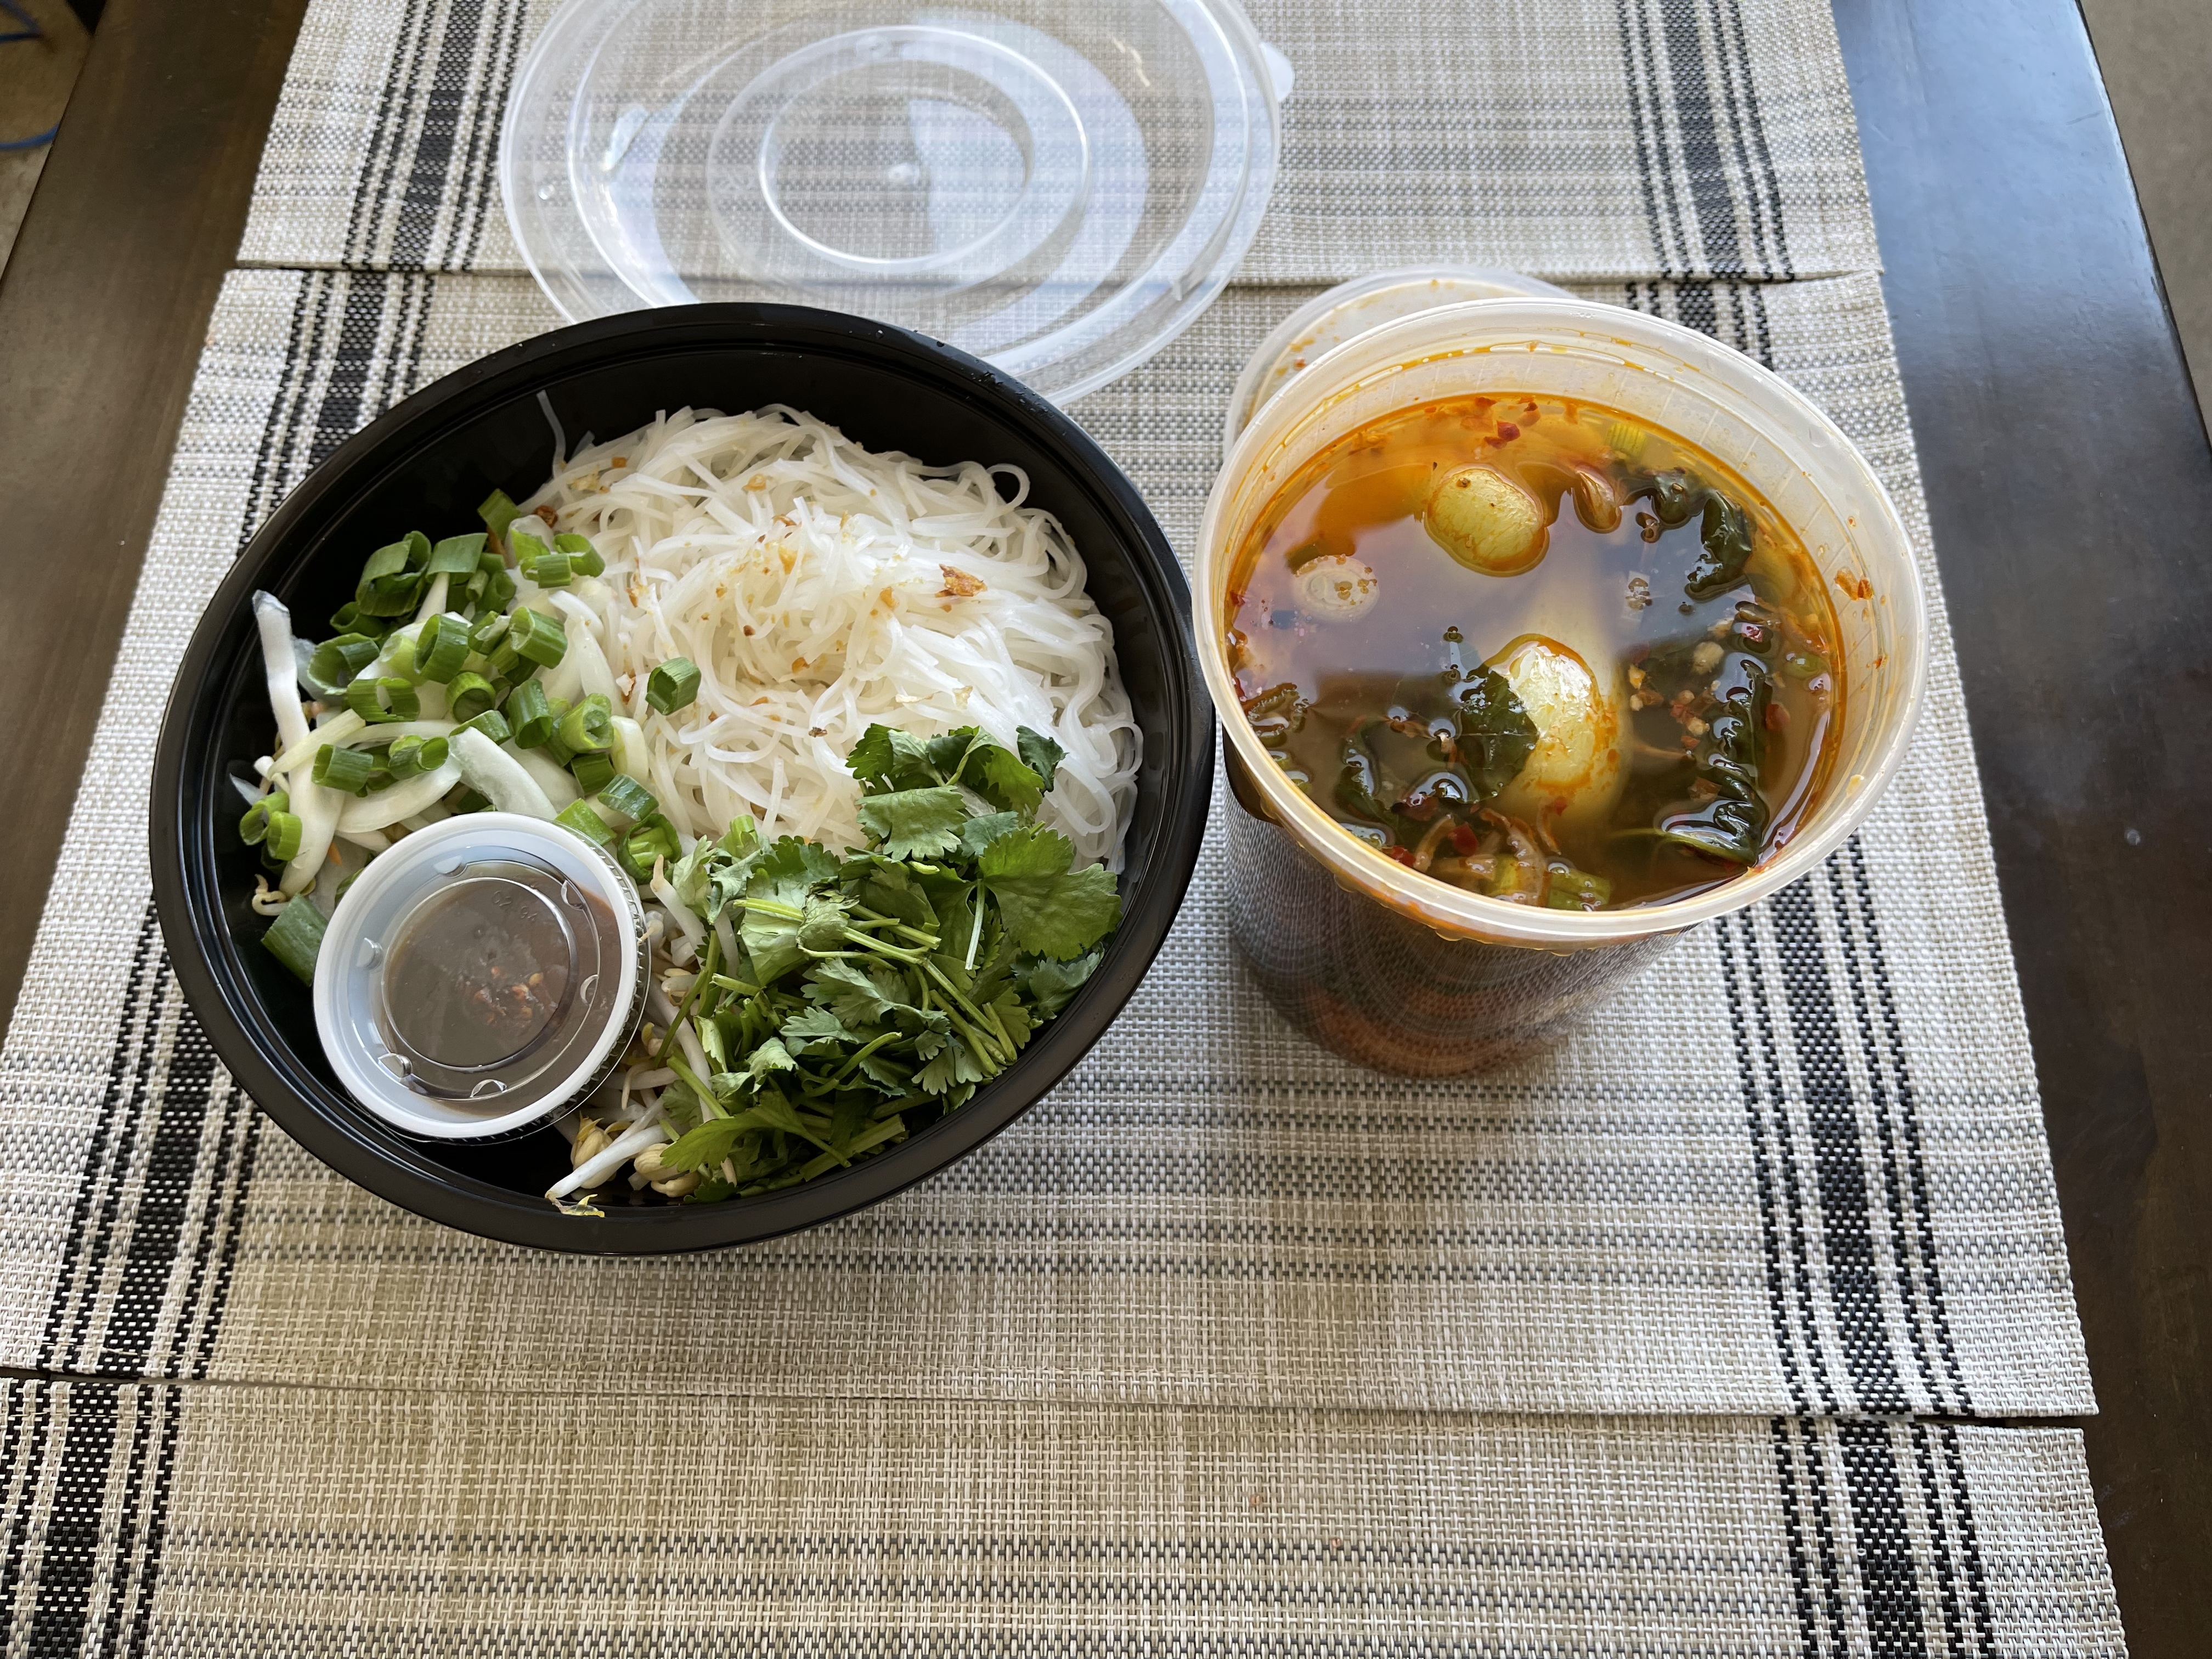 On a brown table with a light brown tablecloth, there is a black bowl of pho broth with scallions, sauce, and noodles. Beside it, there is another takeout container. Photo by Shrivatsa Ravikumar.